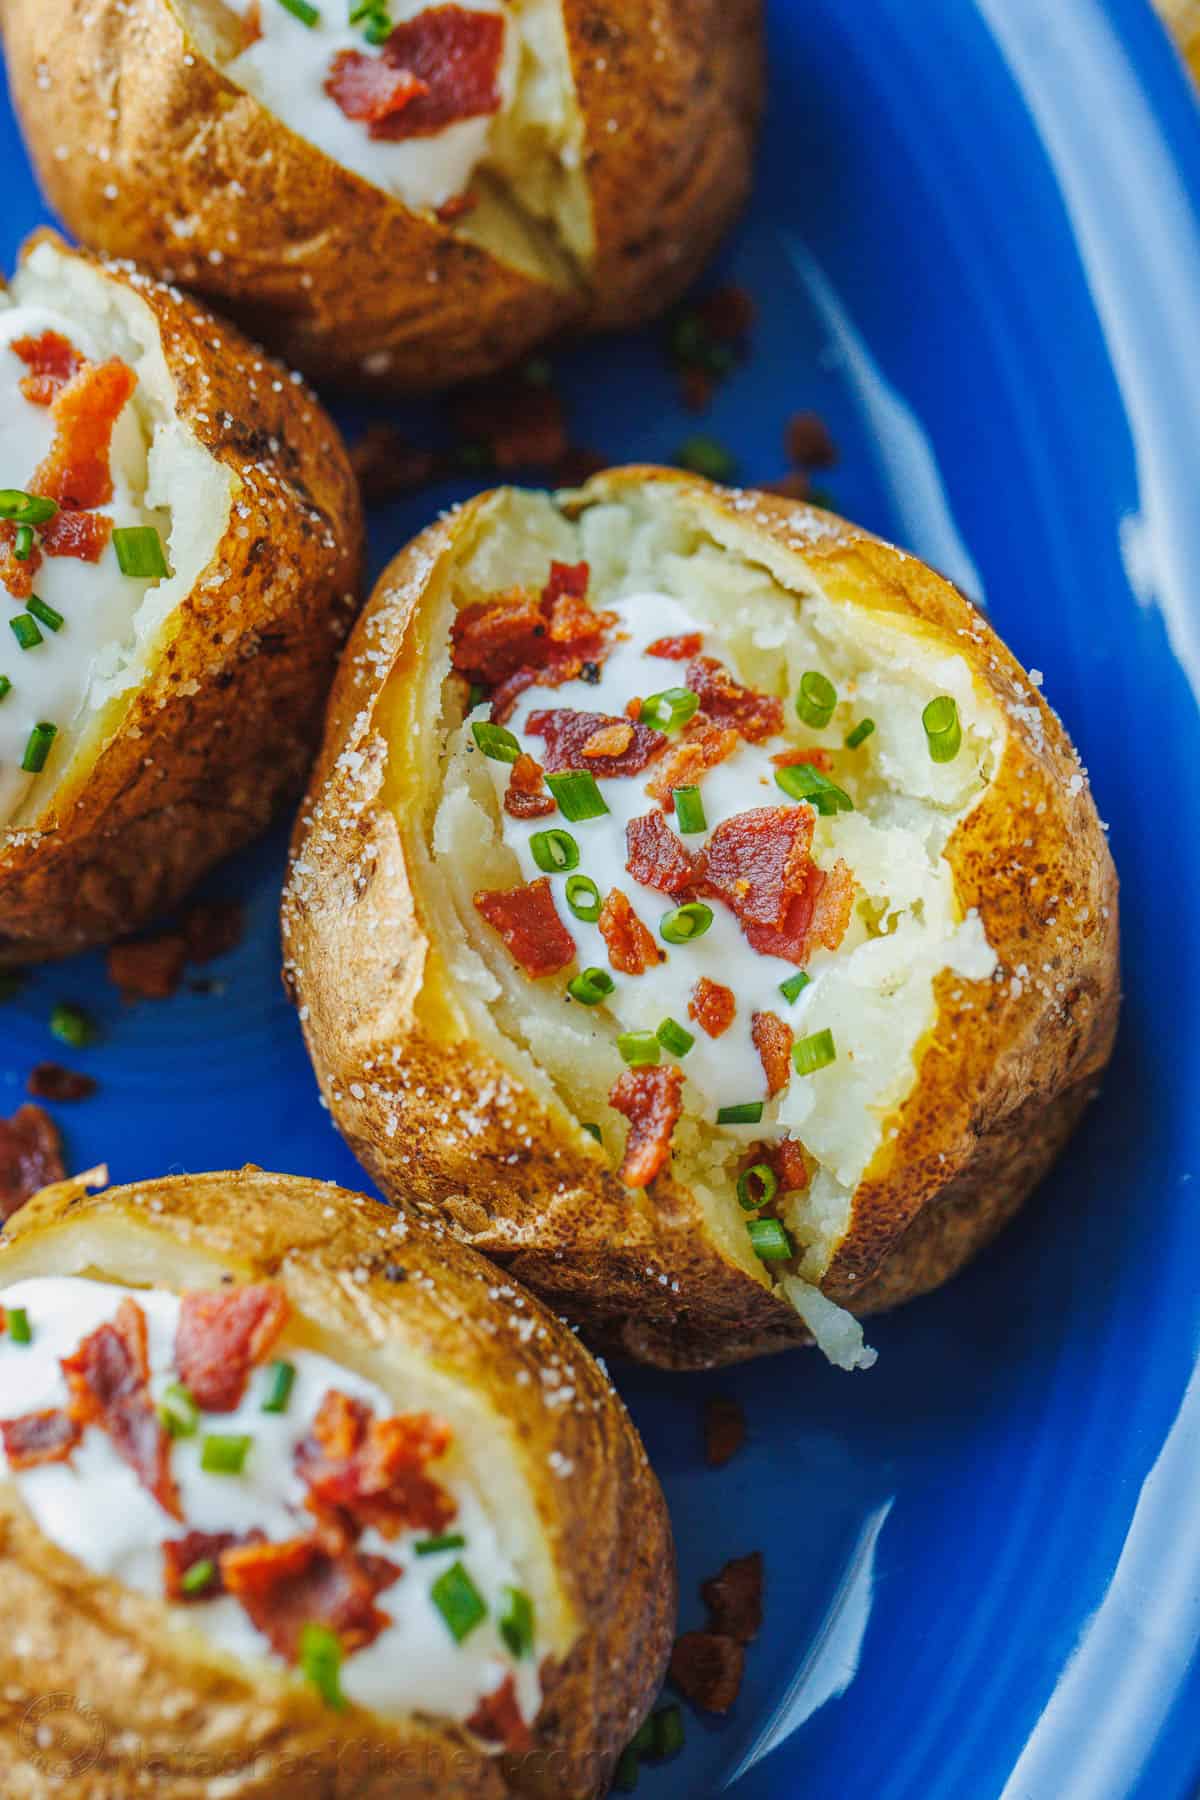 Baked potatoes on a blue plate, topped with sour cream, bacon, and chives.